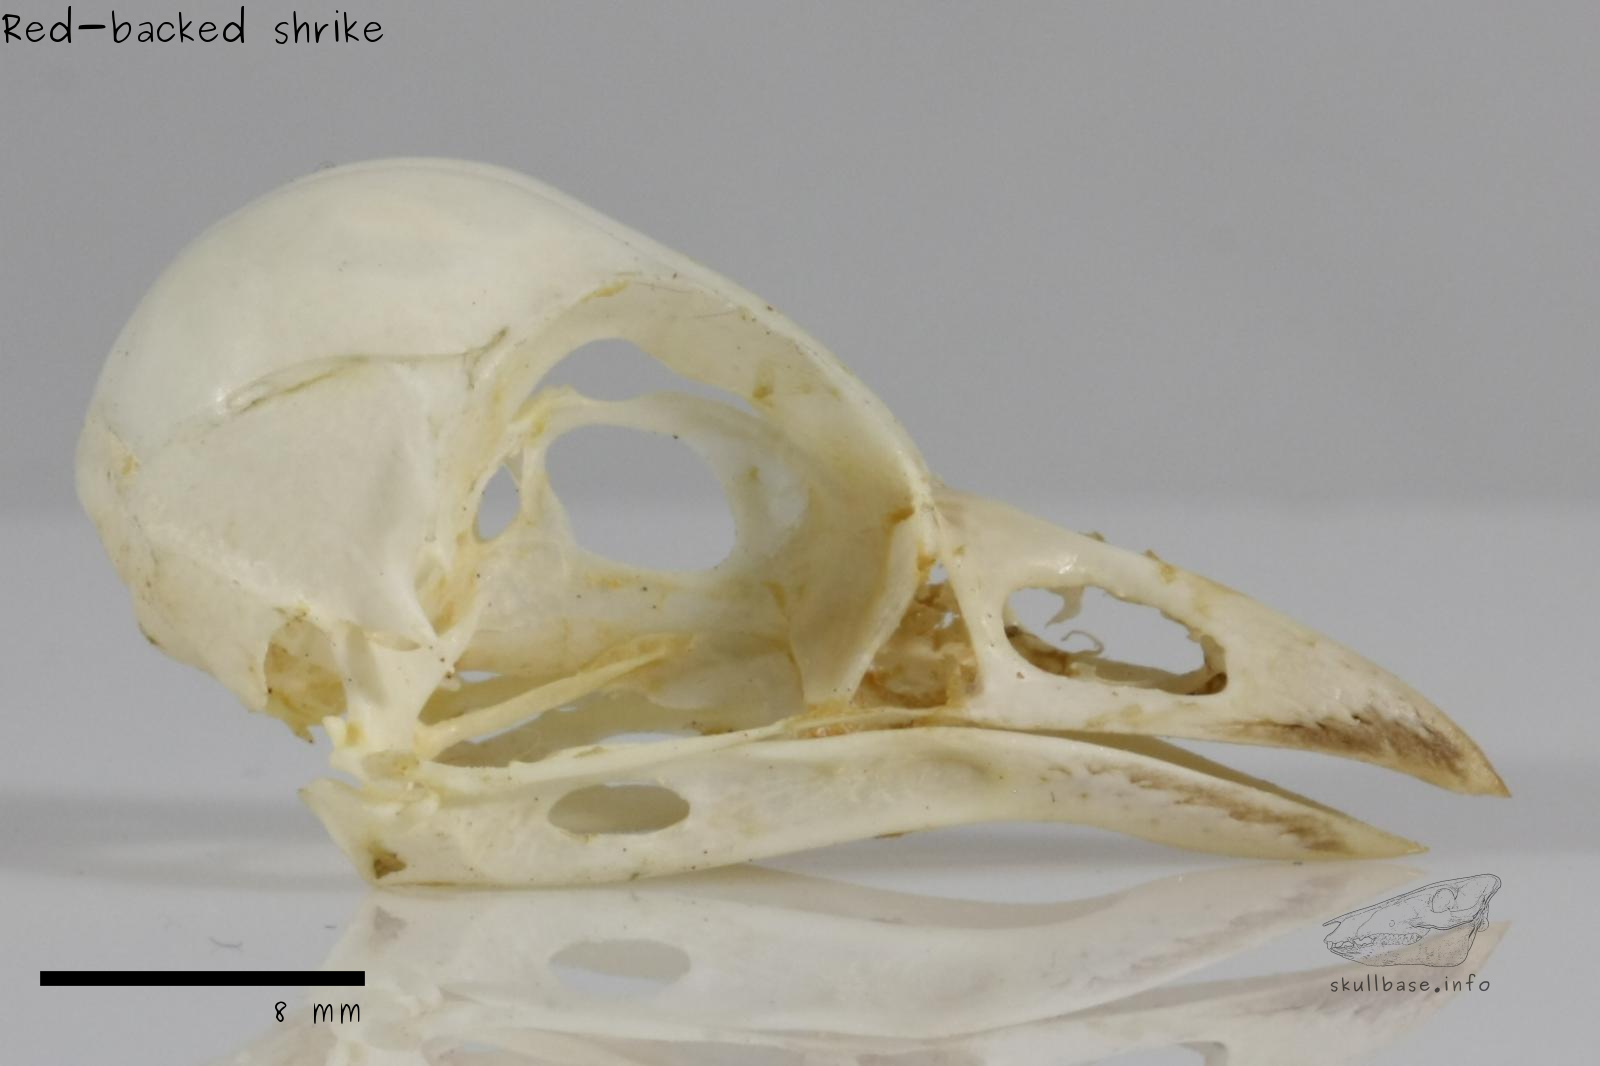 Red-backed shrike (Lanius collurio) skull lateral view